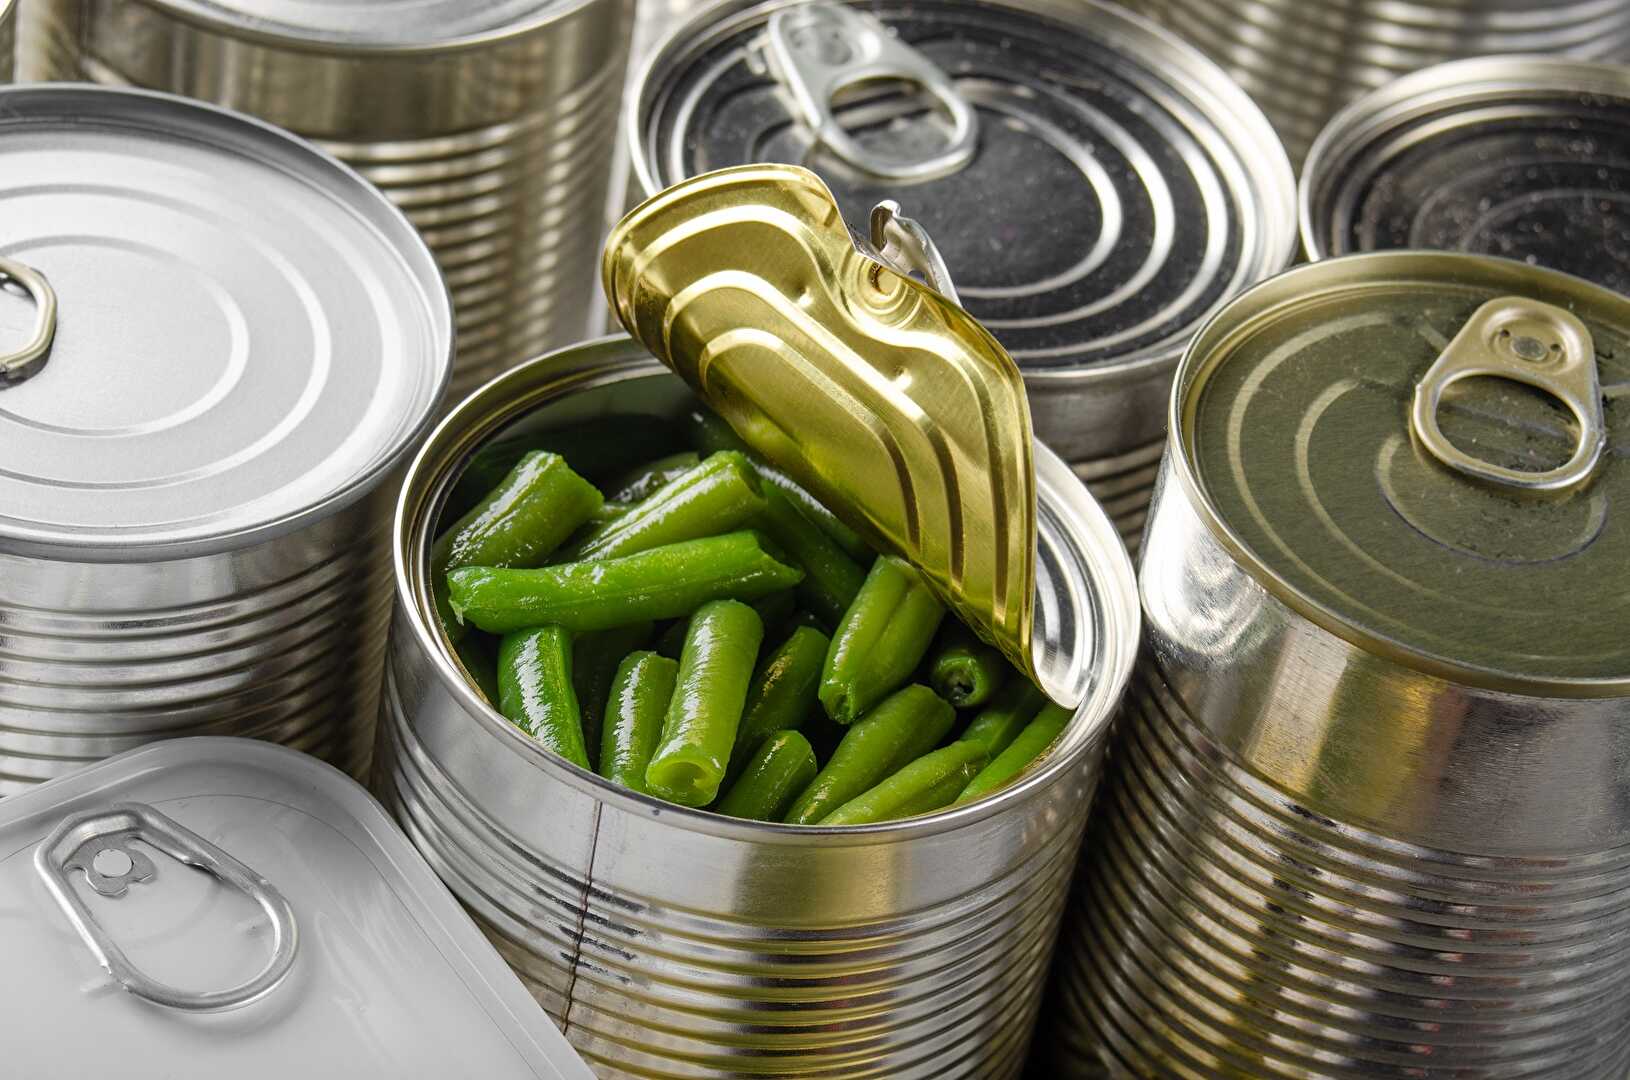 Canned green beans : are they really healthy?